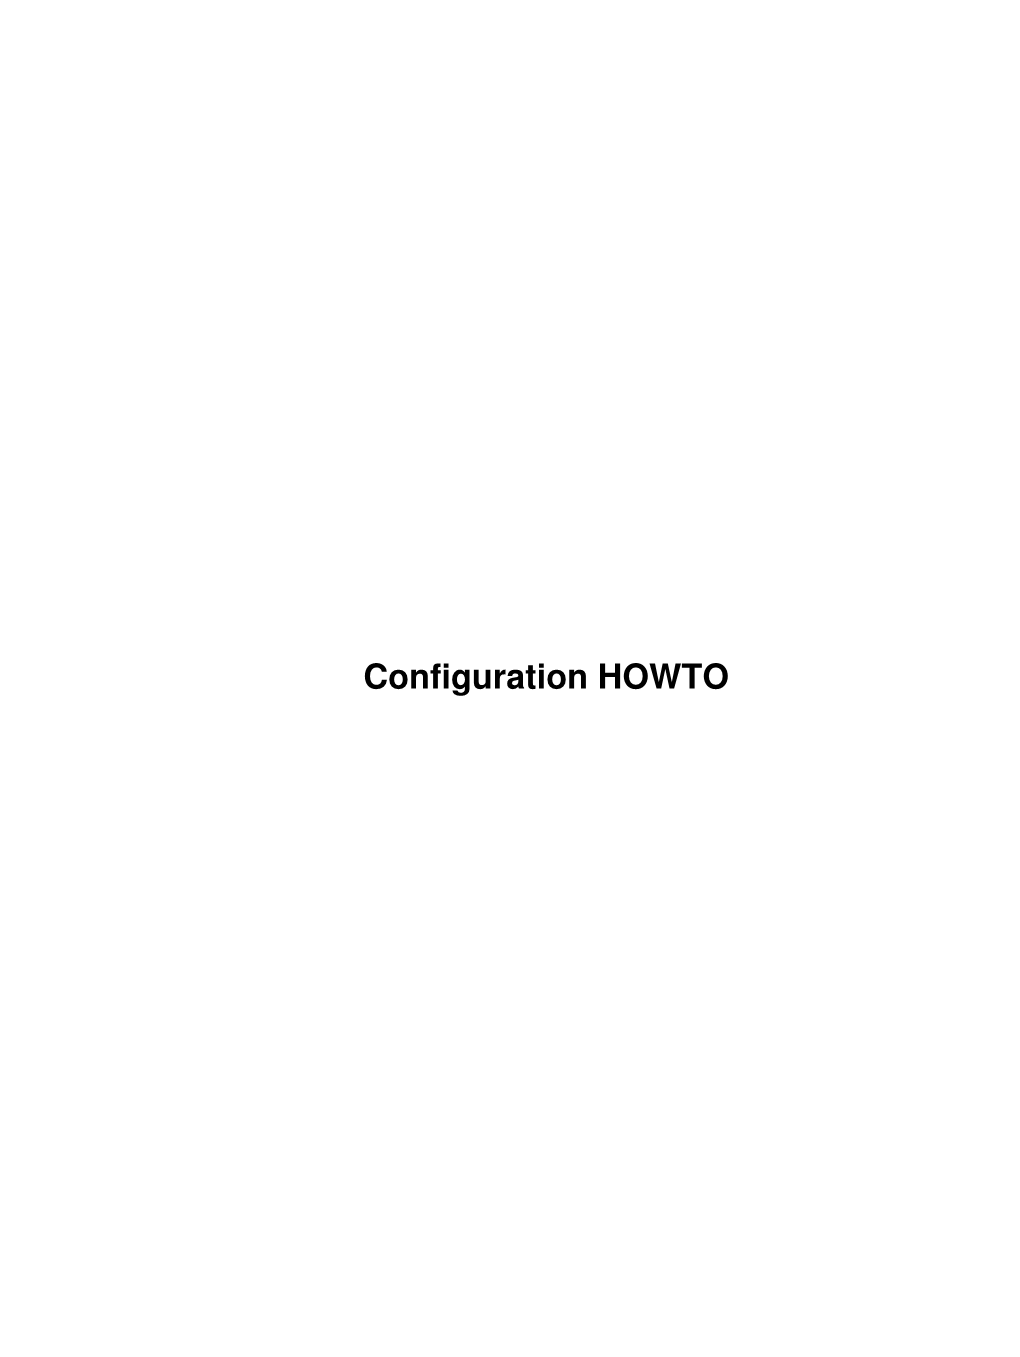 Configuration HOWTO Configuration HOWTO Table of Contents Configuration HOWTO